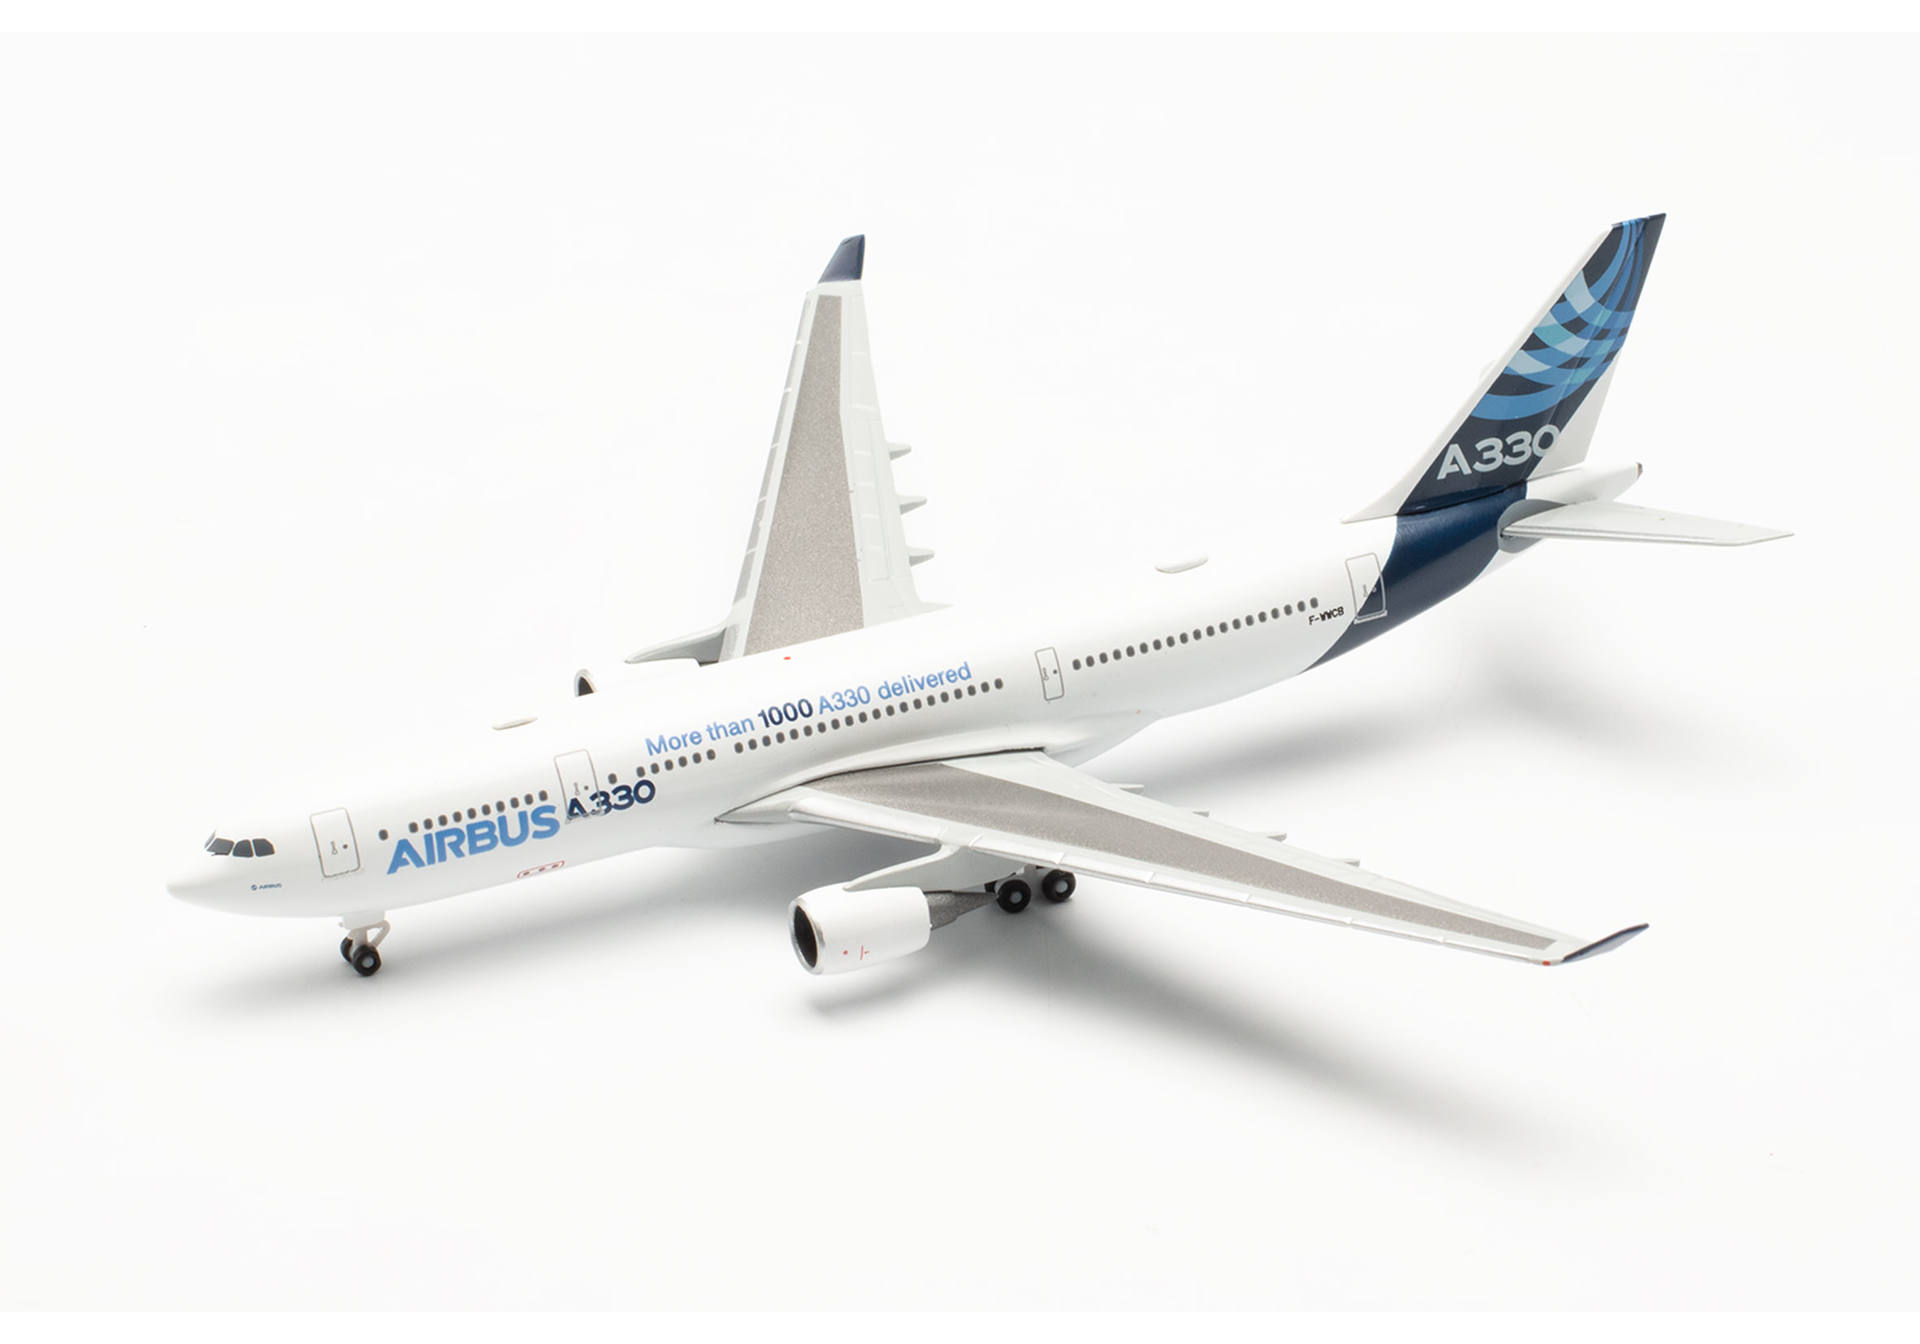 Airbus A330-200 "WingsWorld 25 Years"